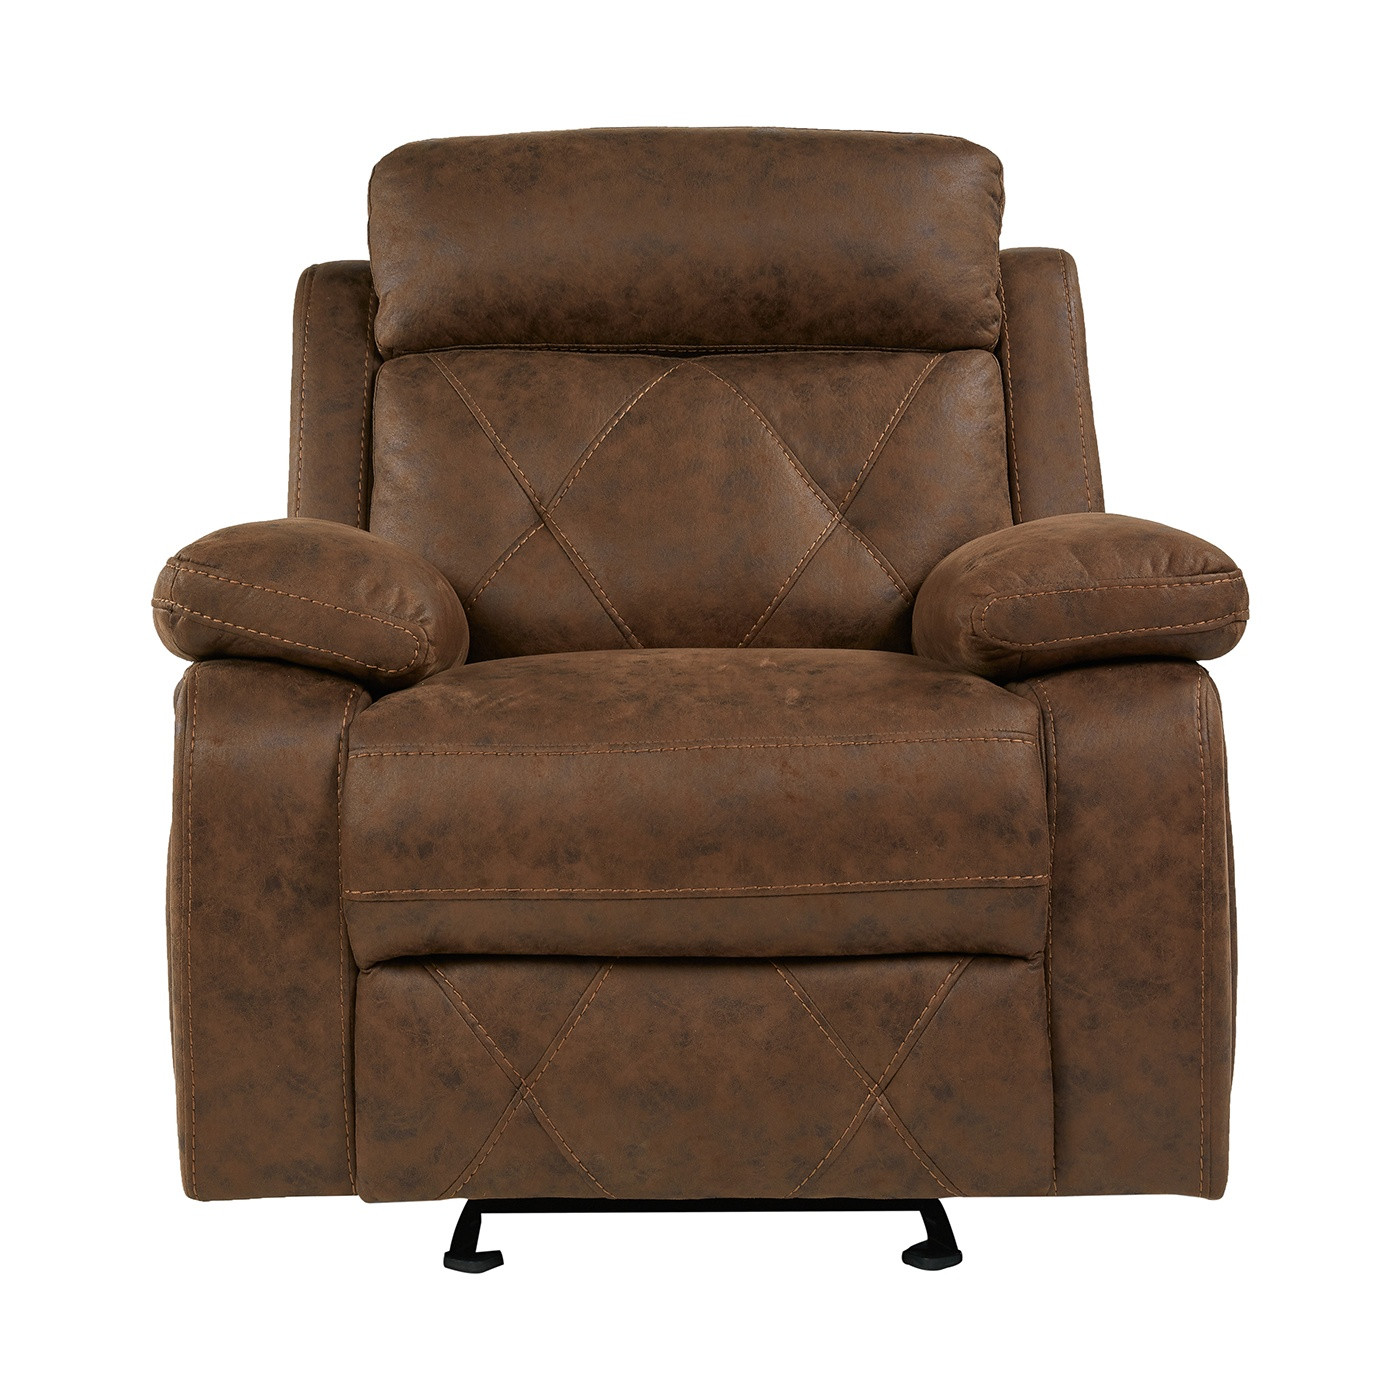 Europe design royal relax leather recliner sofa recliner chair mechanism for home furniture